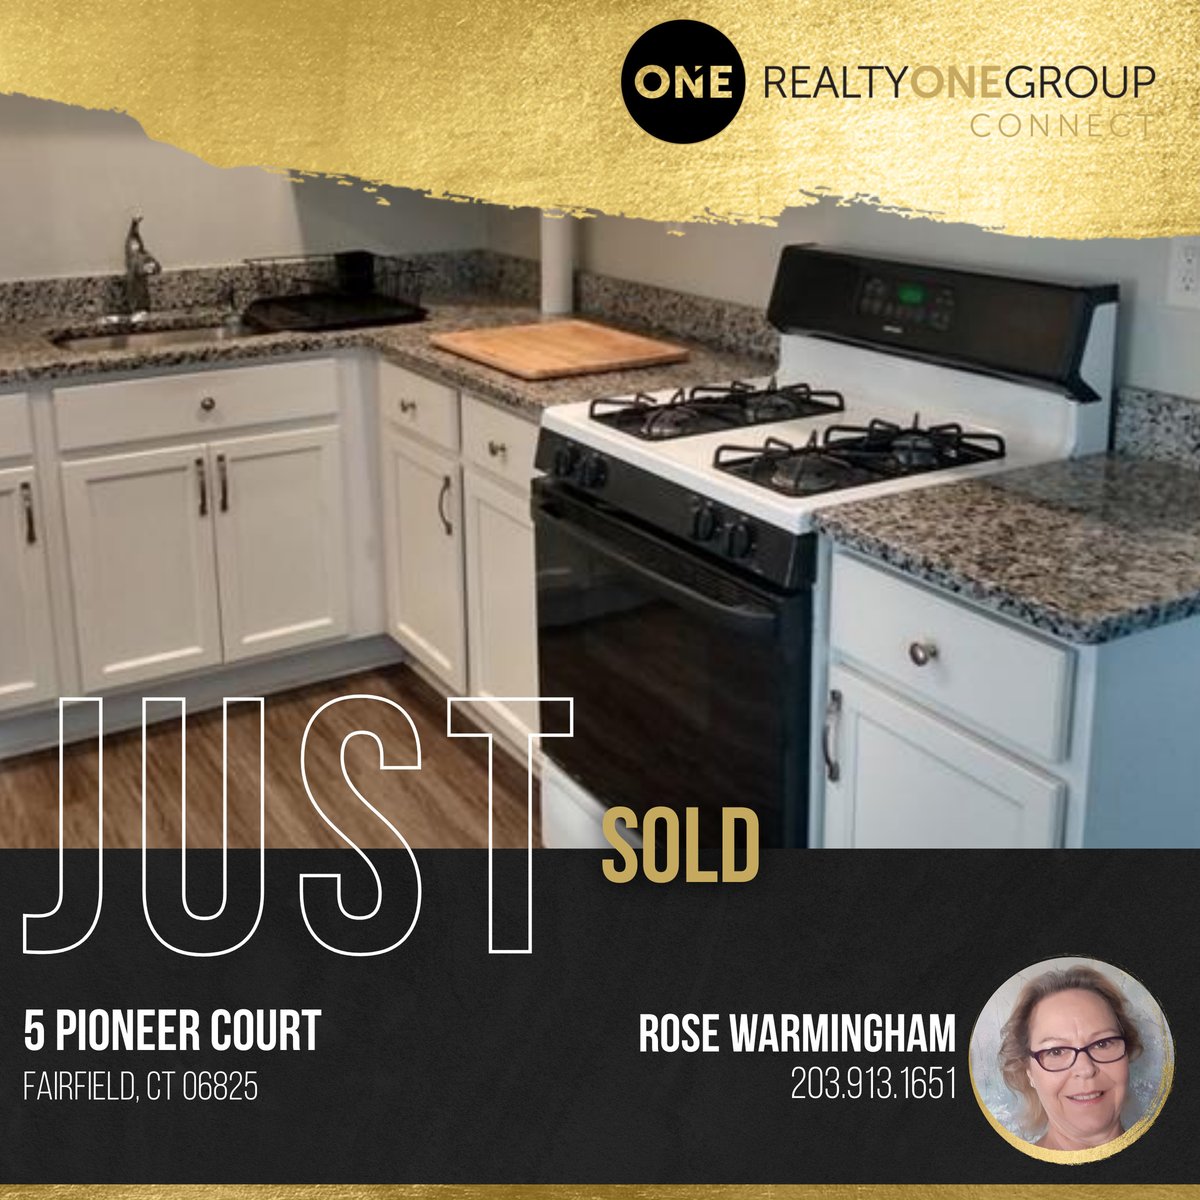 Another ONE Sold by Rose Warmingham! Congrats to you & your clients! ☝️🙌
#JustSold #Realestate #Fairfield #rogconnect #one #Openingdoors facebook.com/16025354531814…